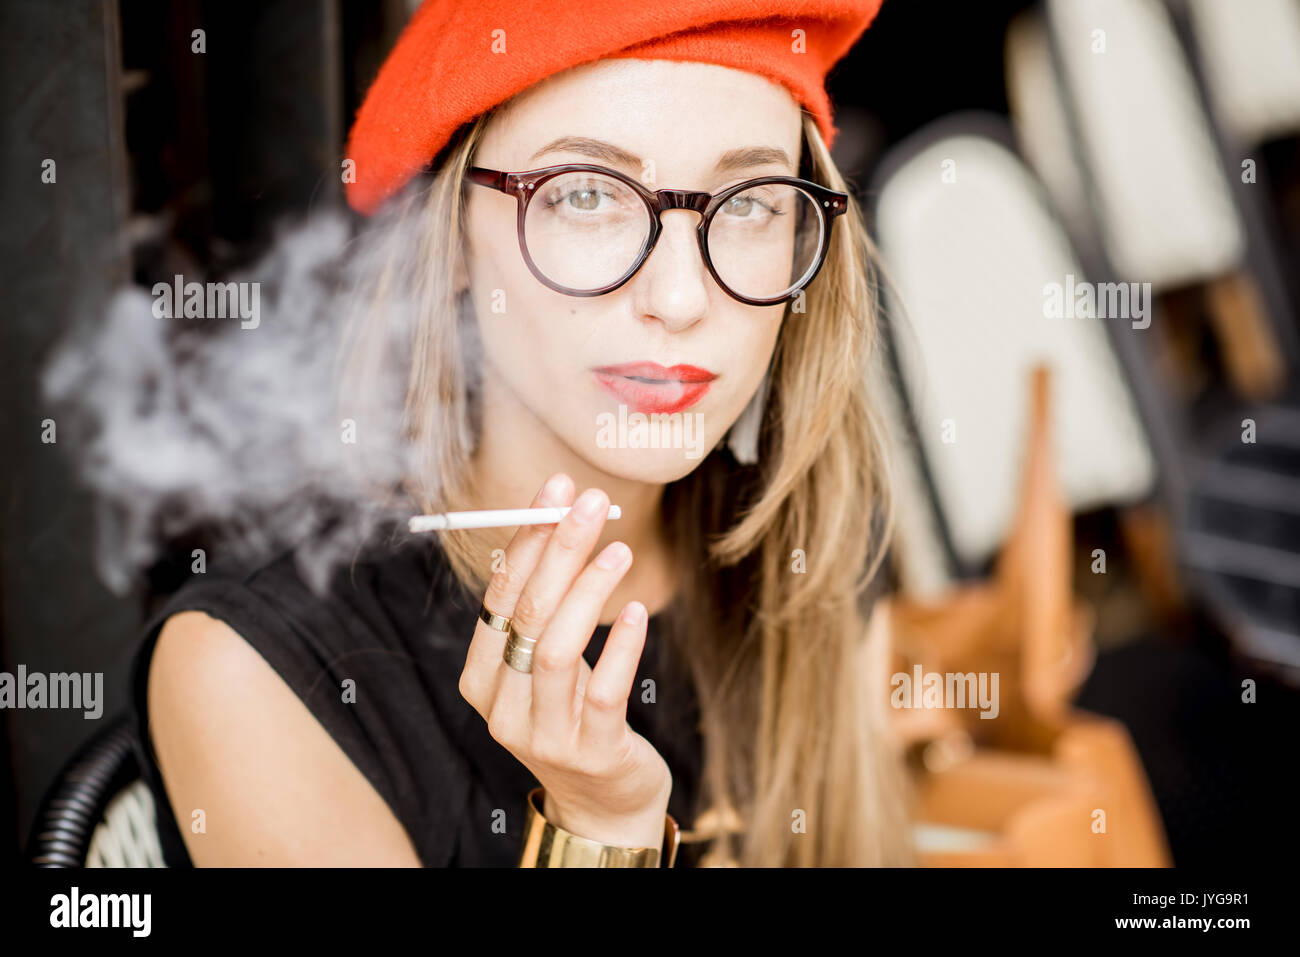 French woman smoking at the cafe Stock Photo